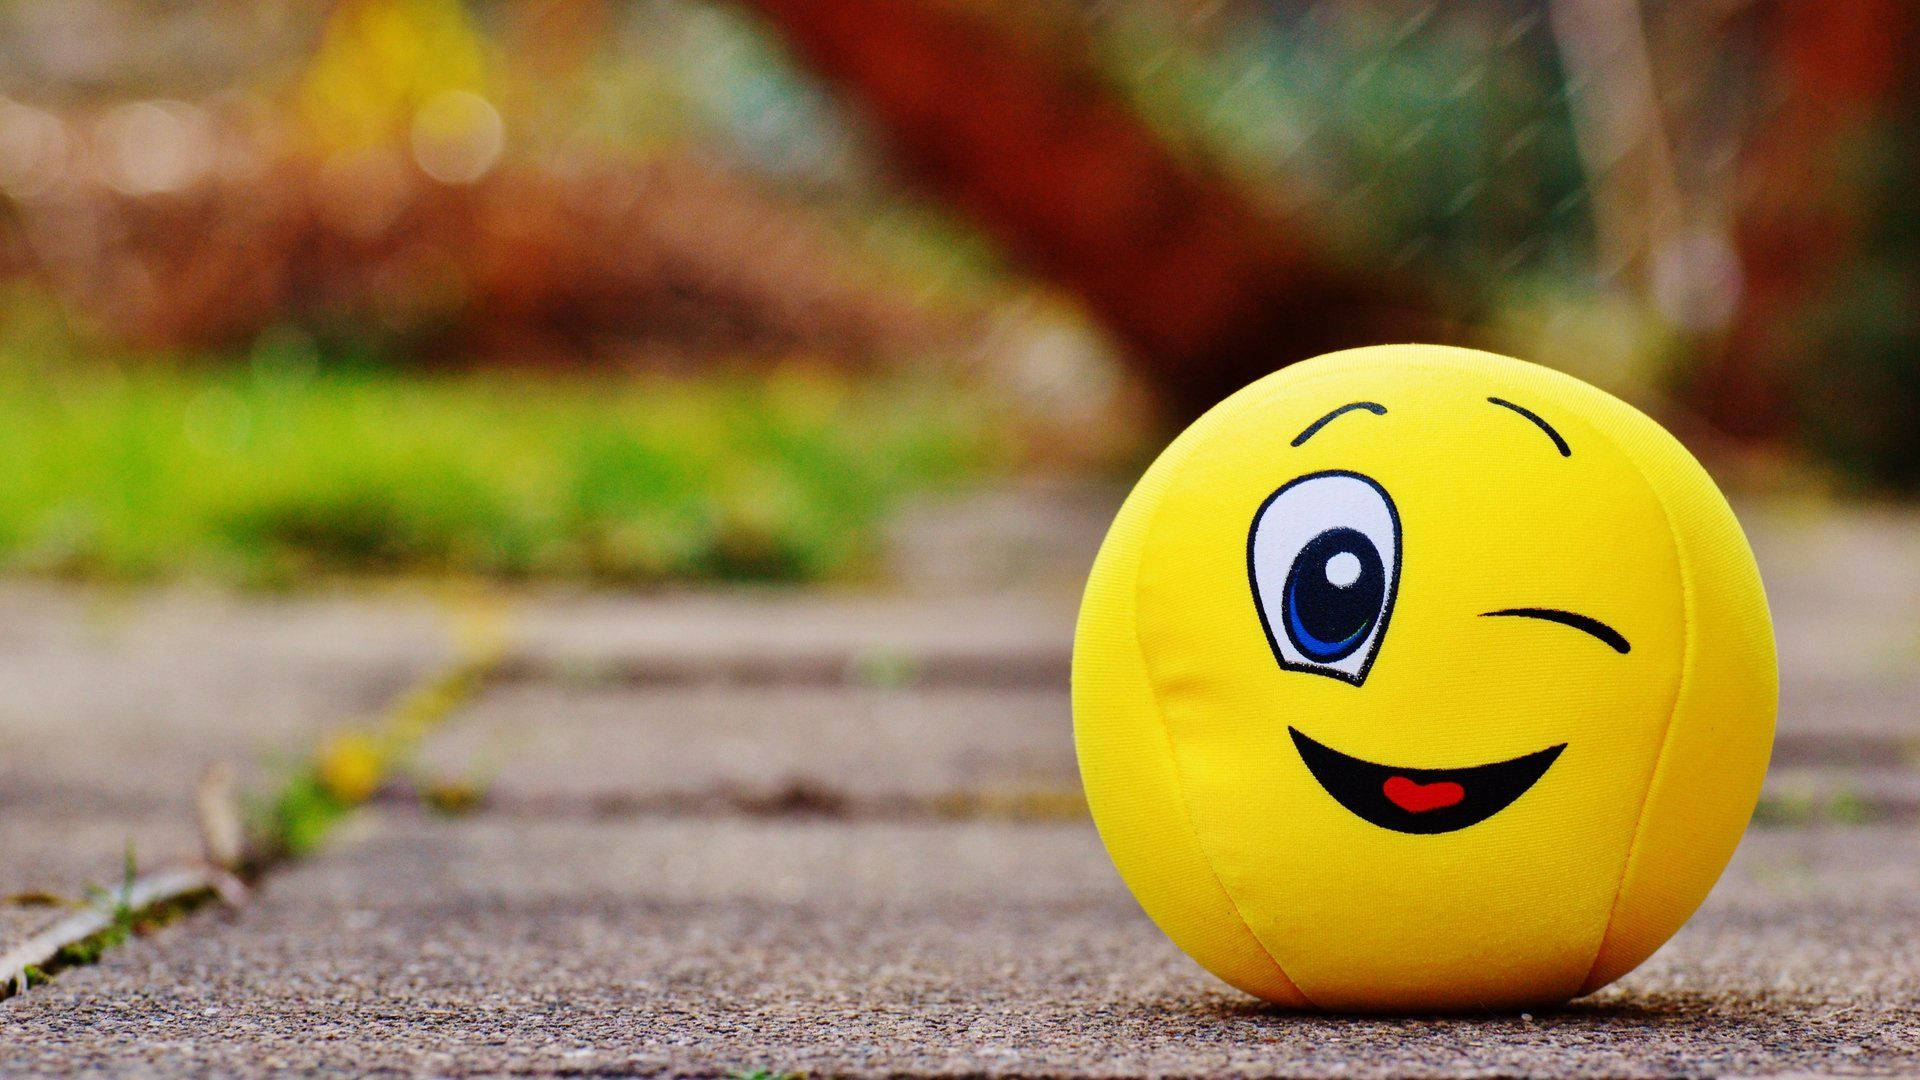 Wink Ball Smiley